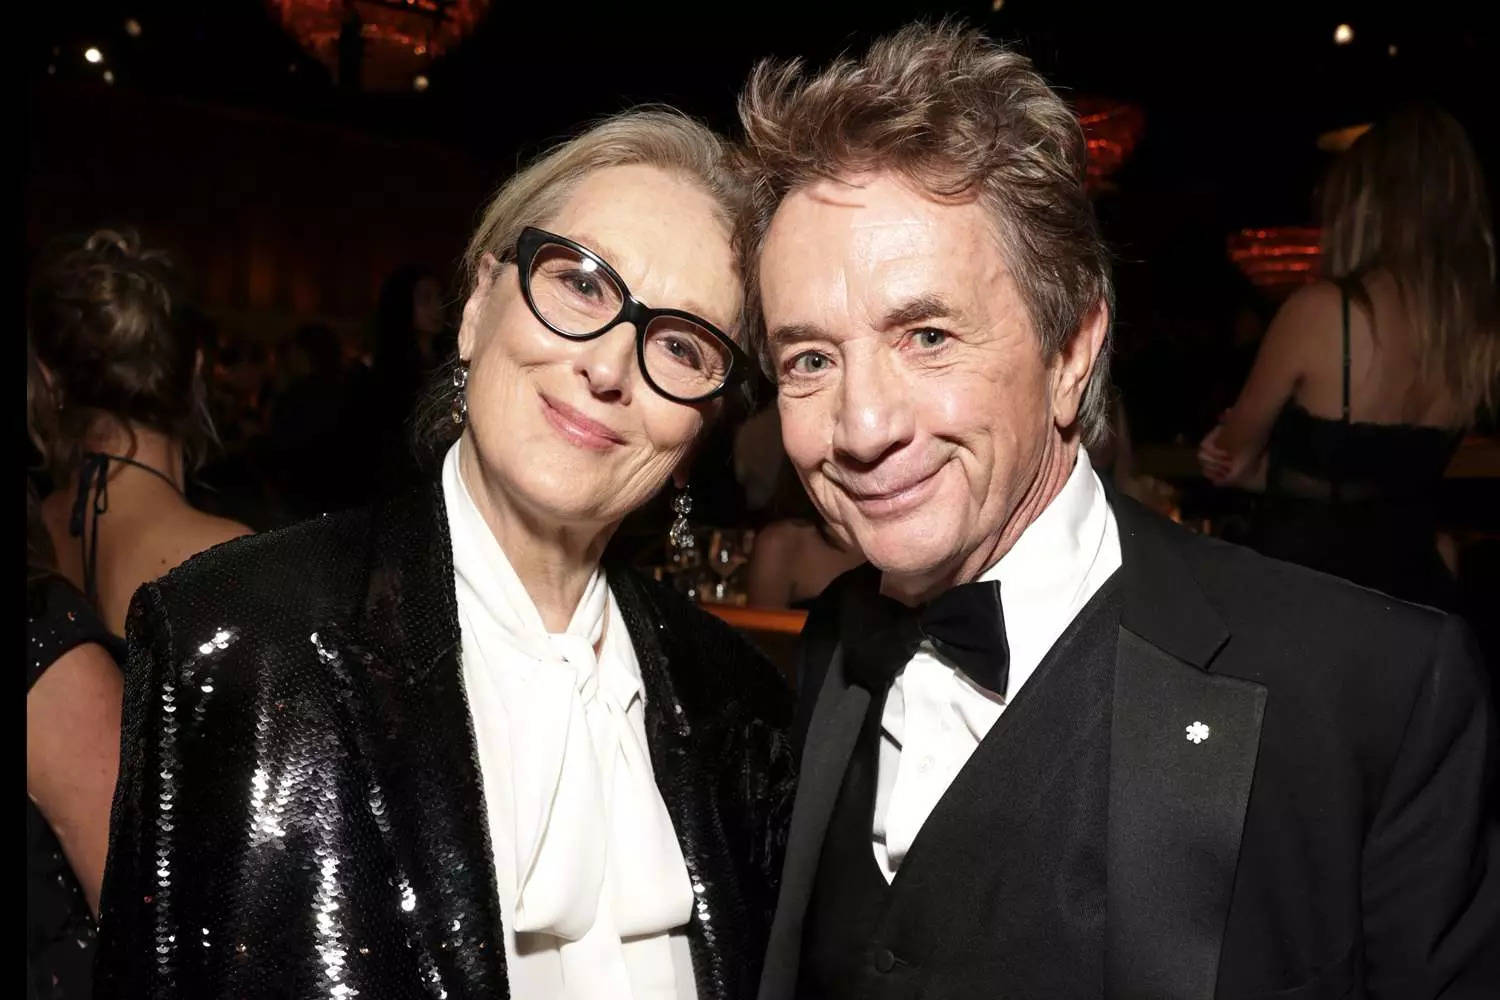 Are Meryl Streep and Martin Short together? Here’s what we know about the romance rumors 